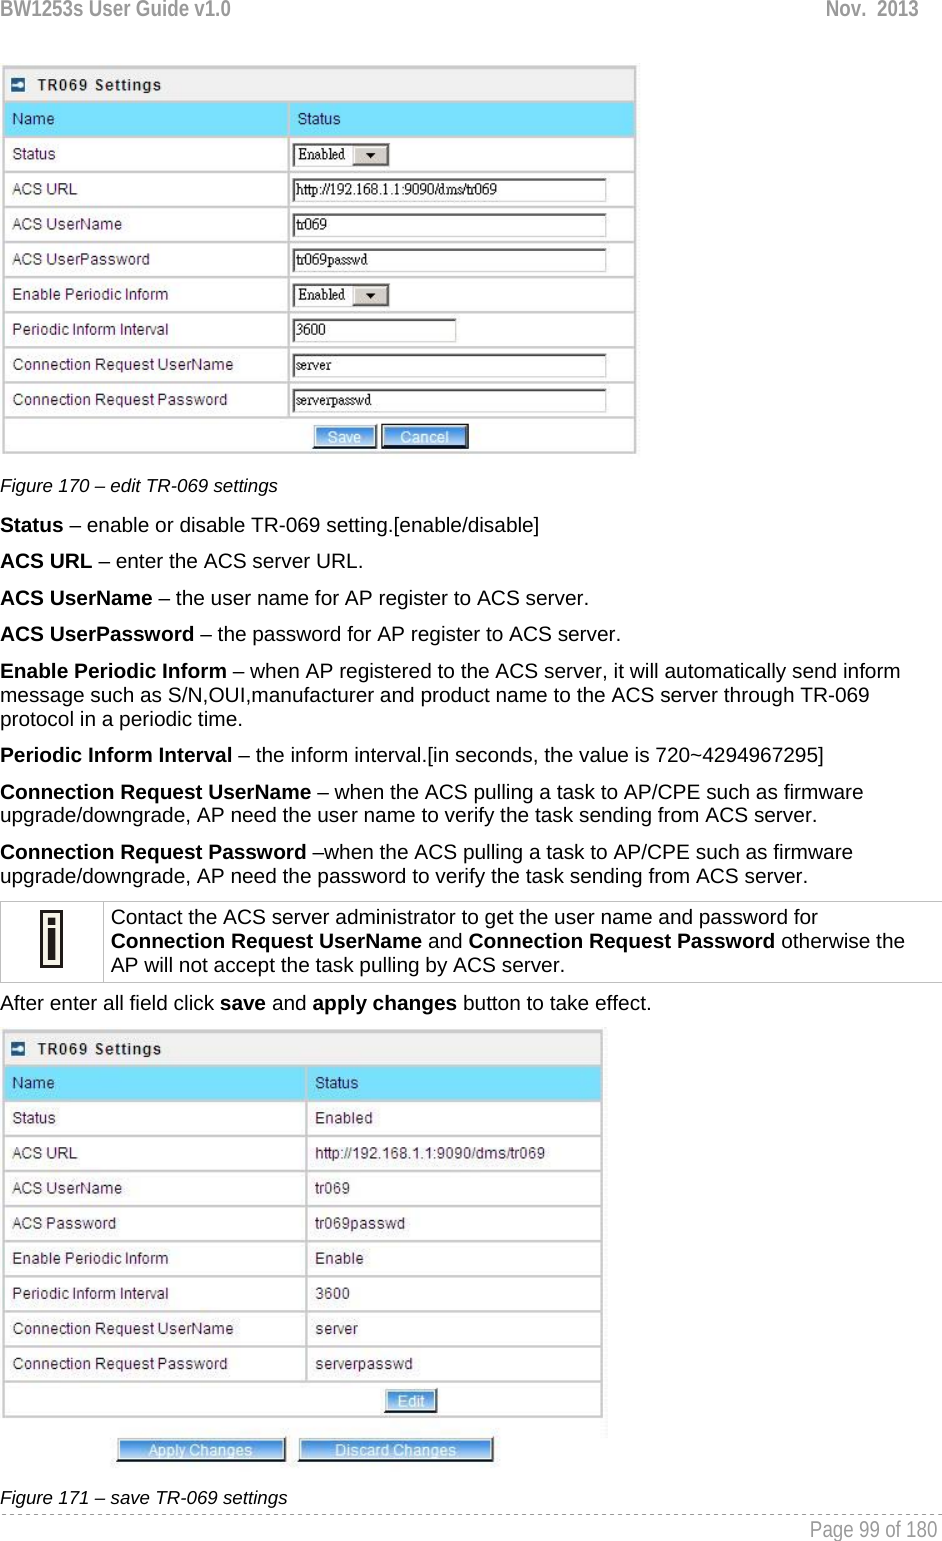 BW1253s User Guide v1.0  Nov.  2013     Page 99 of 180    Figure 170 – edit TR-069 settings Status – enable or disable TR-069 setting.[enable/disable] ACS URL – enter the ACS server URL. ACS UserName – the user name for AP register to ACS server. ACS UserPassword – the password for AP register to ACS server. Enable Periodic Inform – when AP registered to the ACS server, it will automatically send inform message such as S/N,OUI,manufacturer and product name to the ACS server through TR-069 protocol in a periodic time. Periodic Inform Interval – the inform interval.[in seconds, the value is 720~4294967295] Connection Request UserName – when the ACS pulling a task to AP/CPE such as firmware upgrade/downgrade, AP need the user name to verify the task sending from ACS server. Connection Request Password –when the ACS pulling a task to AP/CPE such as firmware upgrade/downgrade, AP need the password to verify the task sending from ACS server.  Contact the ACS server administrator to get the user name and password for Connection Request UserName and Connection Request Password otherwise the AP will not accept the task pulling by ACS server. After enter all field click save and apply changes button to take effect.  Figure 171 – save TR-069 settings 